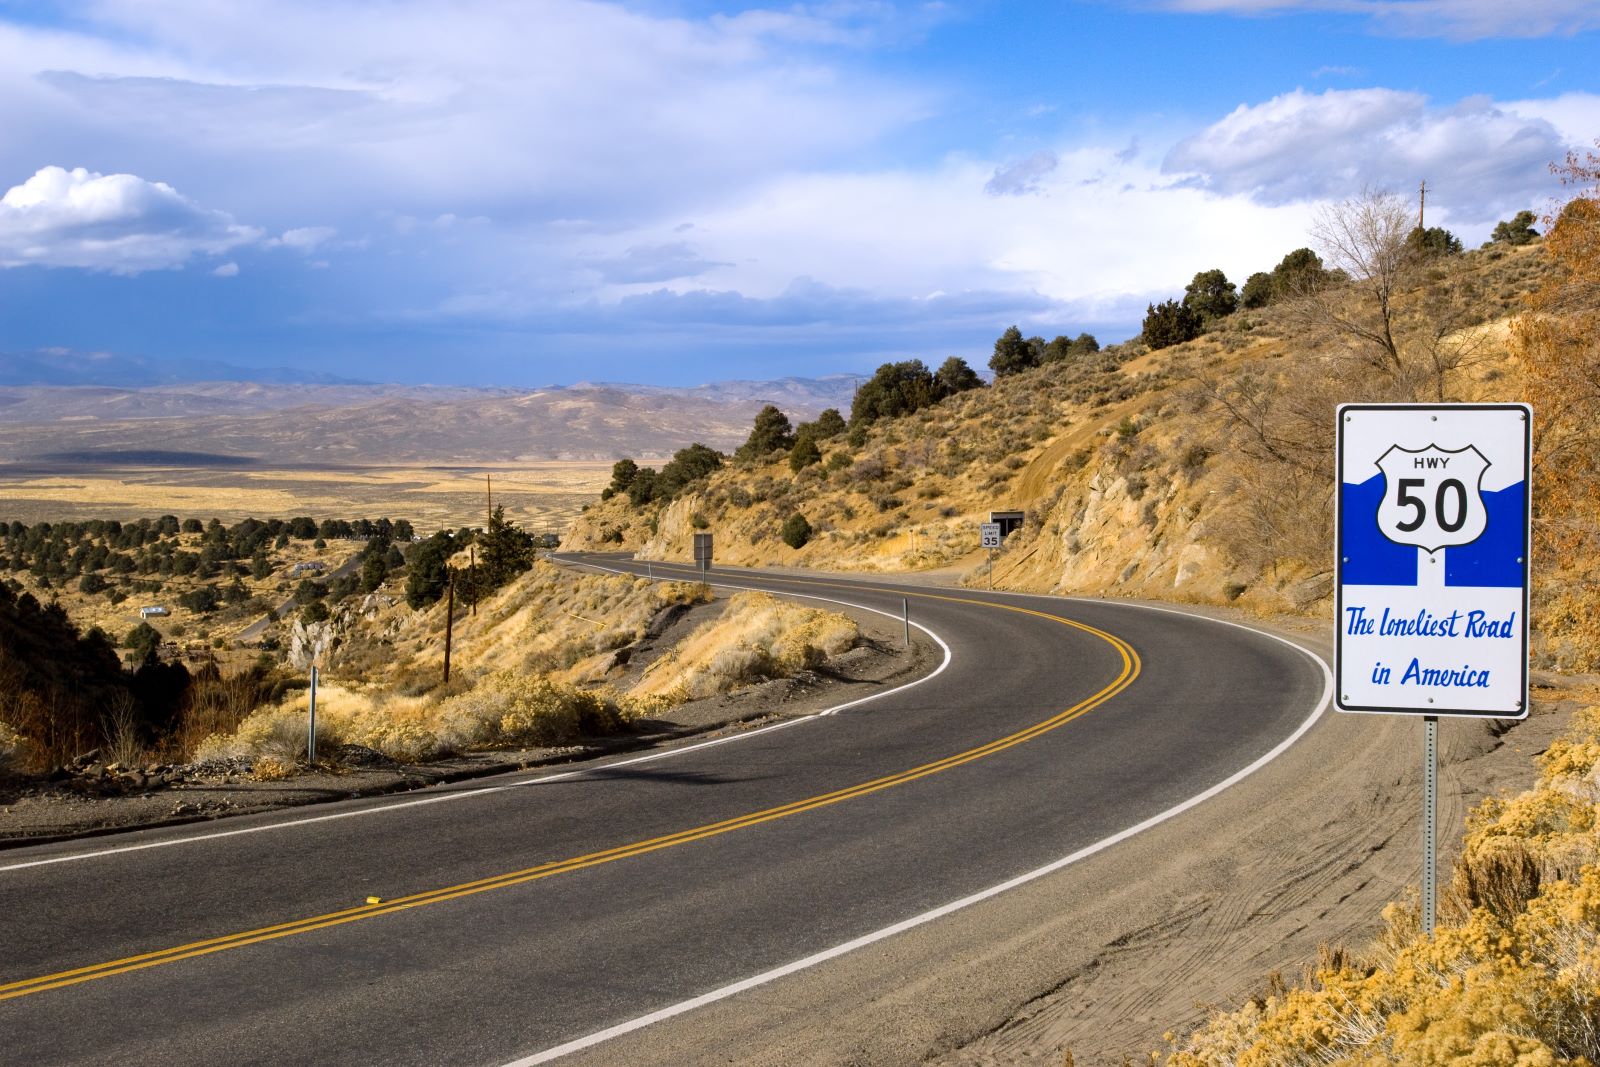 <p class="wp-caption-text">Image Credit: Shutterstock / Natalia Bratslavsky</p>  <p>US Route 50 cuts through the heart of Nevada, offering solitude and stark desert beauty. Perfect for those seeking a quiet, introspective trip.</p>